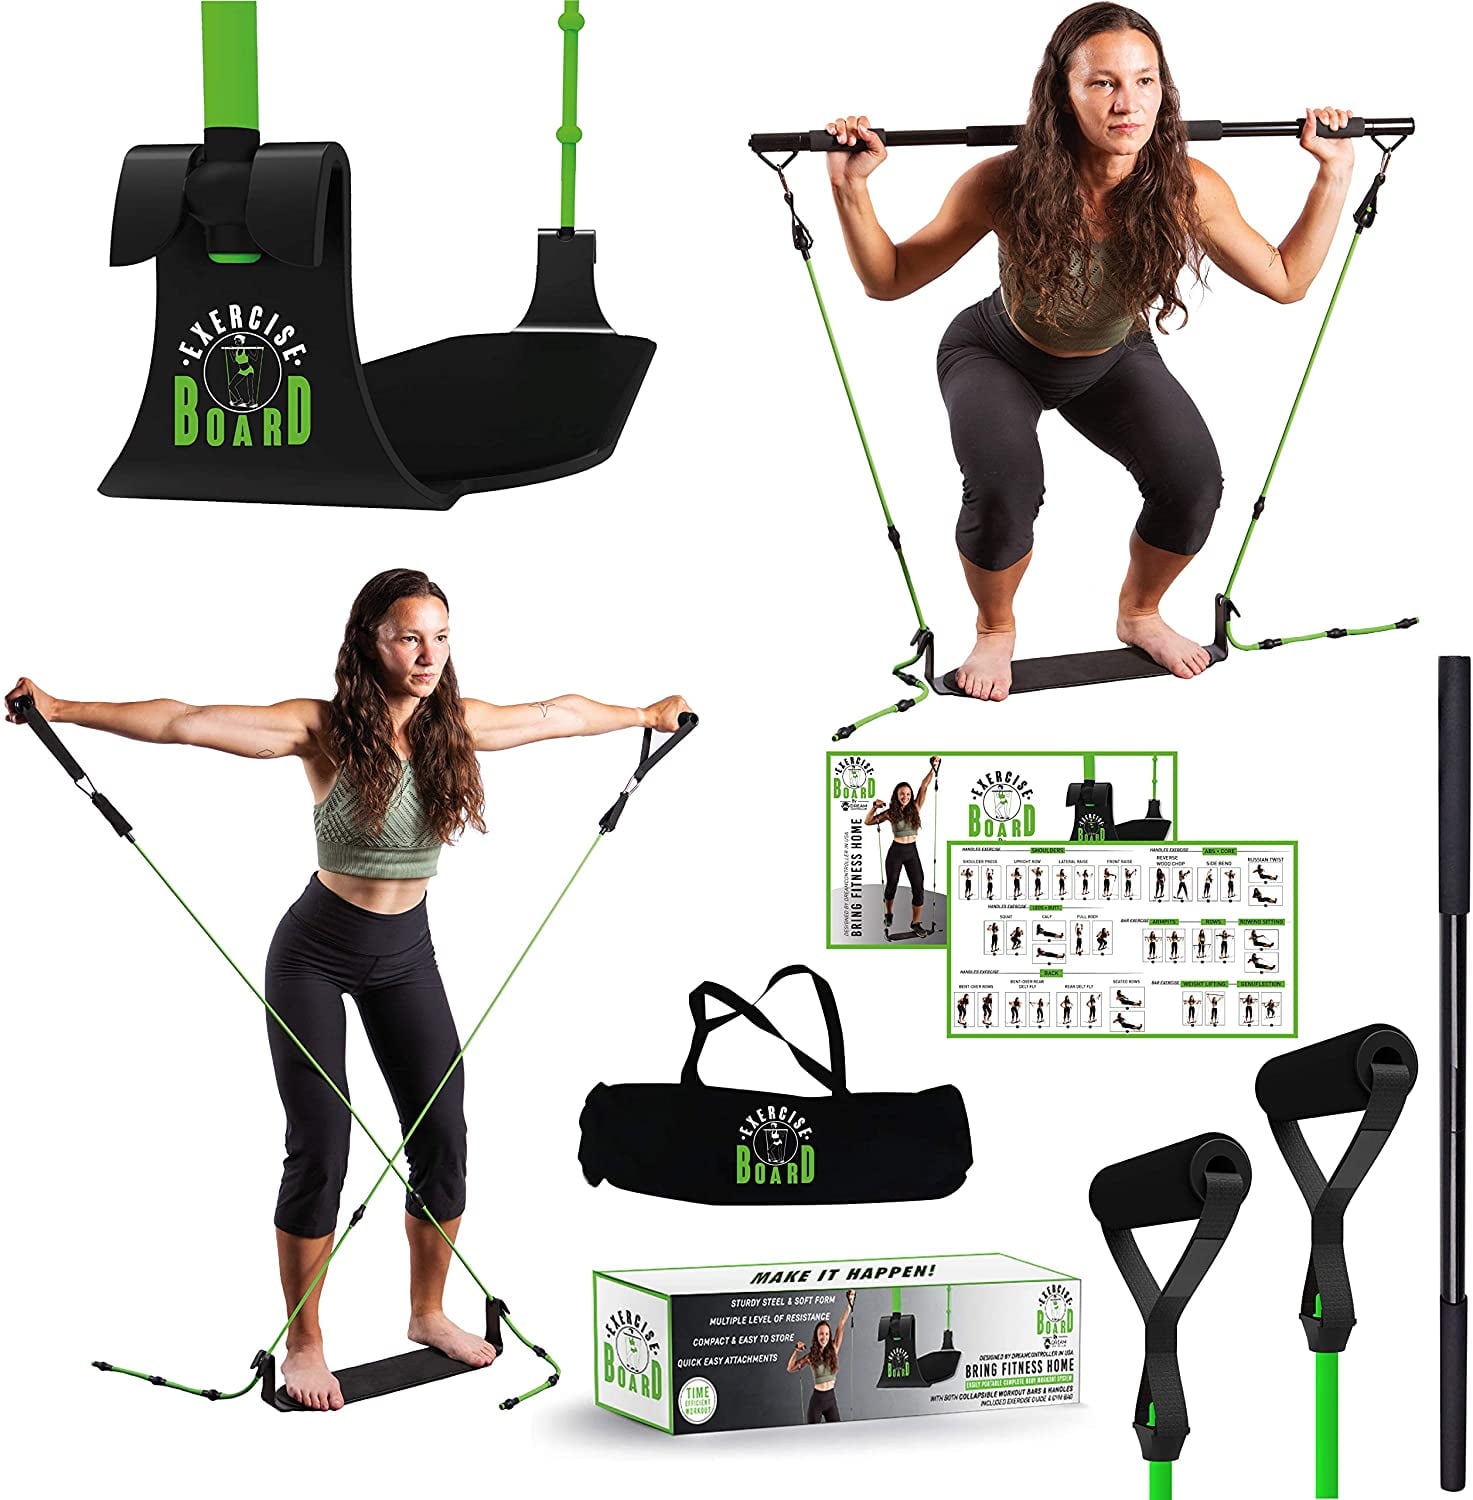 Pilates bar kit with Resistance Bands for Home Workout, Pilates Equipment  with Upgraded 3in1 Workout bar & 6 Exercise Resistance Bands, Pilates bar